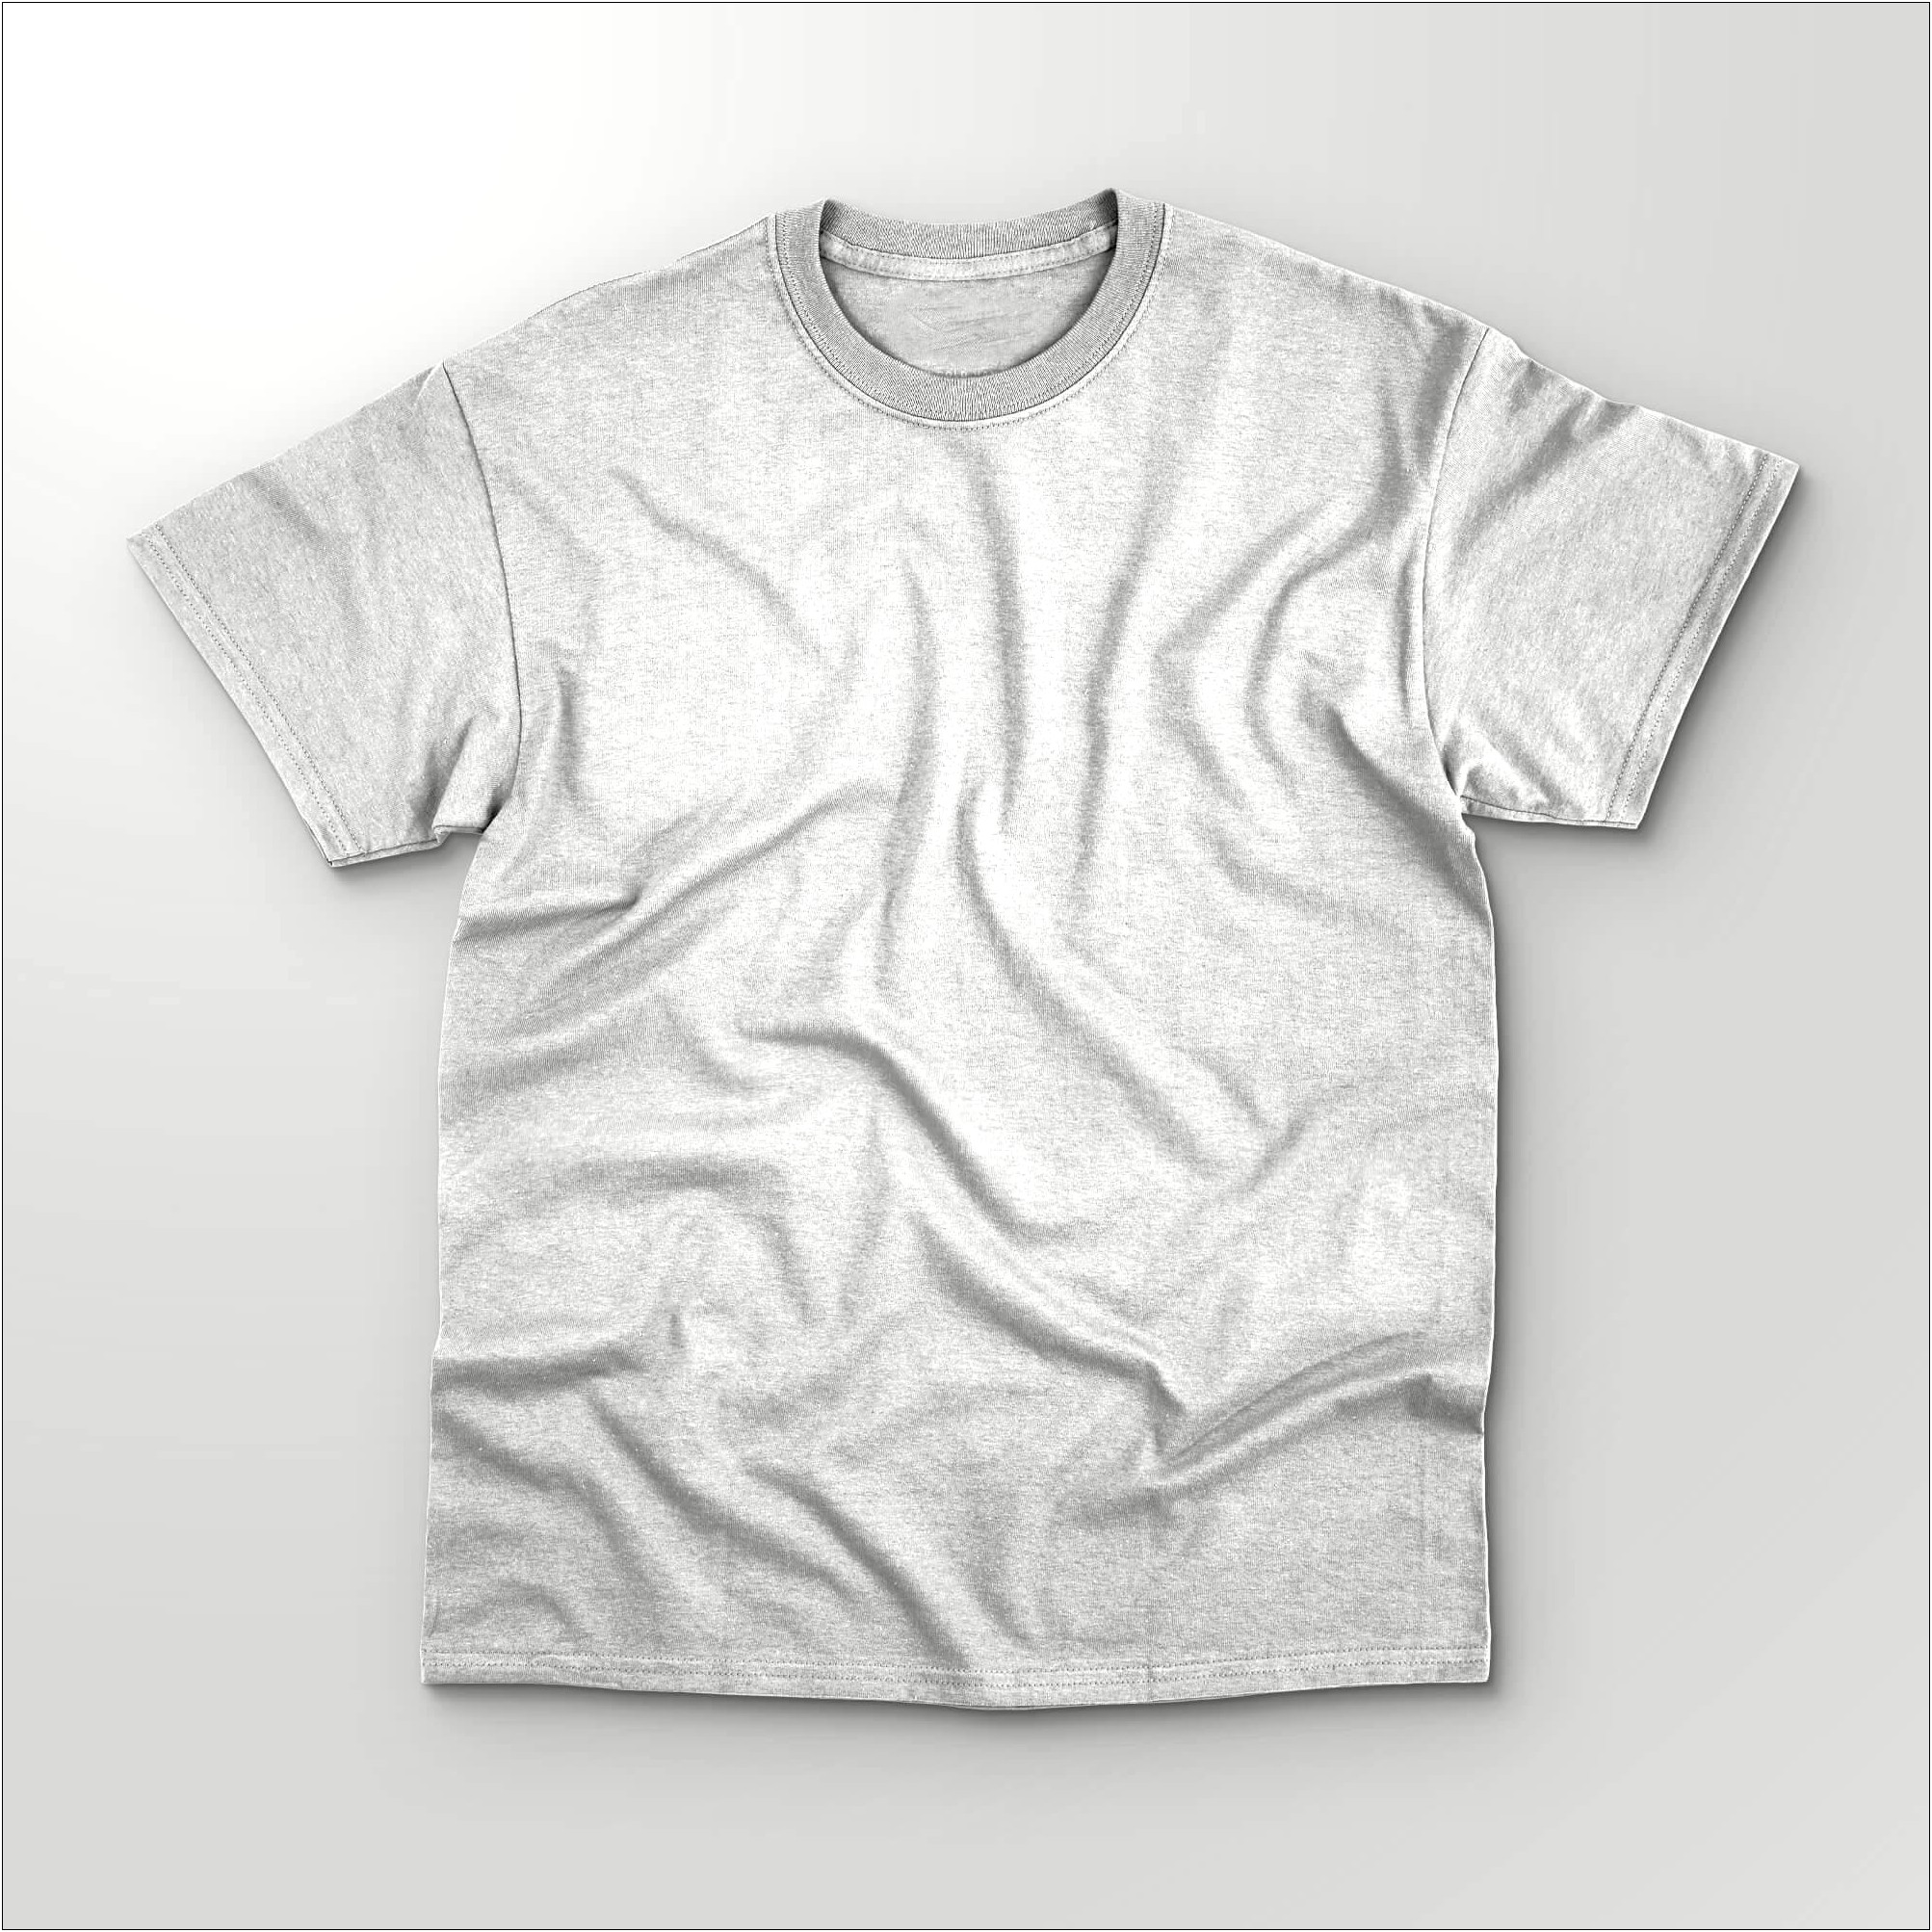 T Shirt Template Photoshop Psd Download